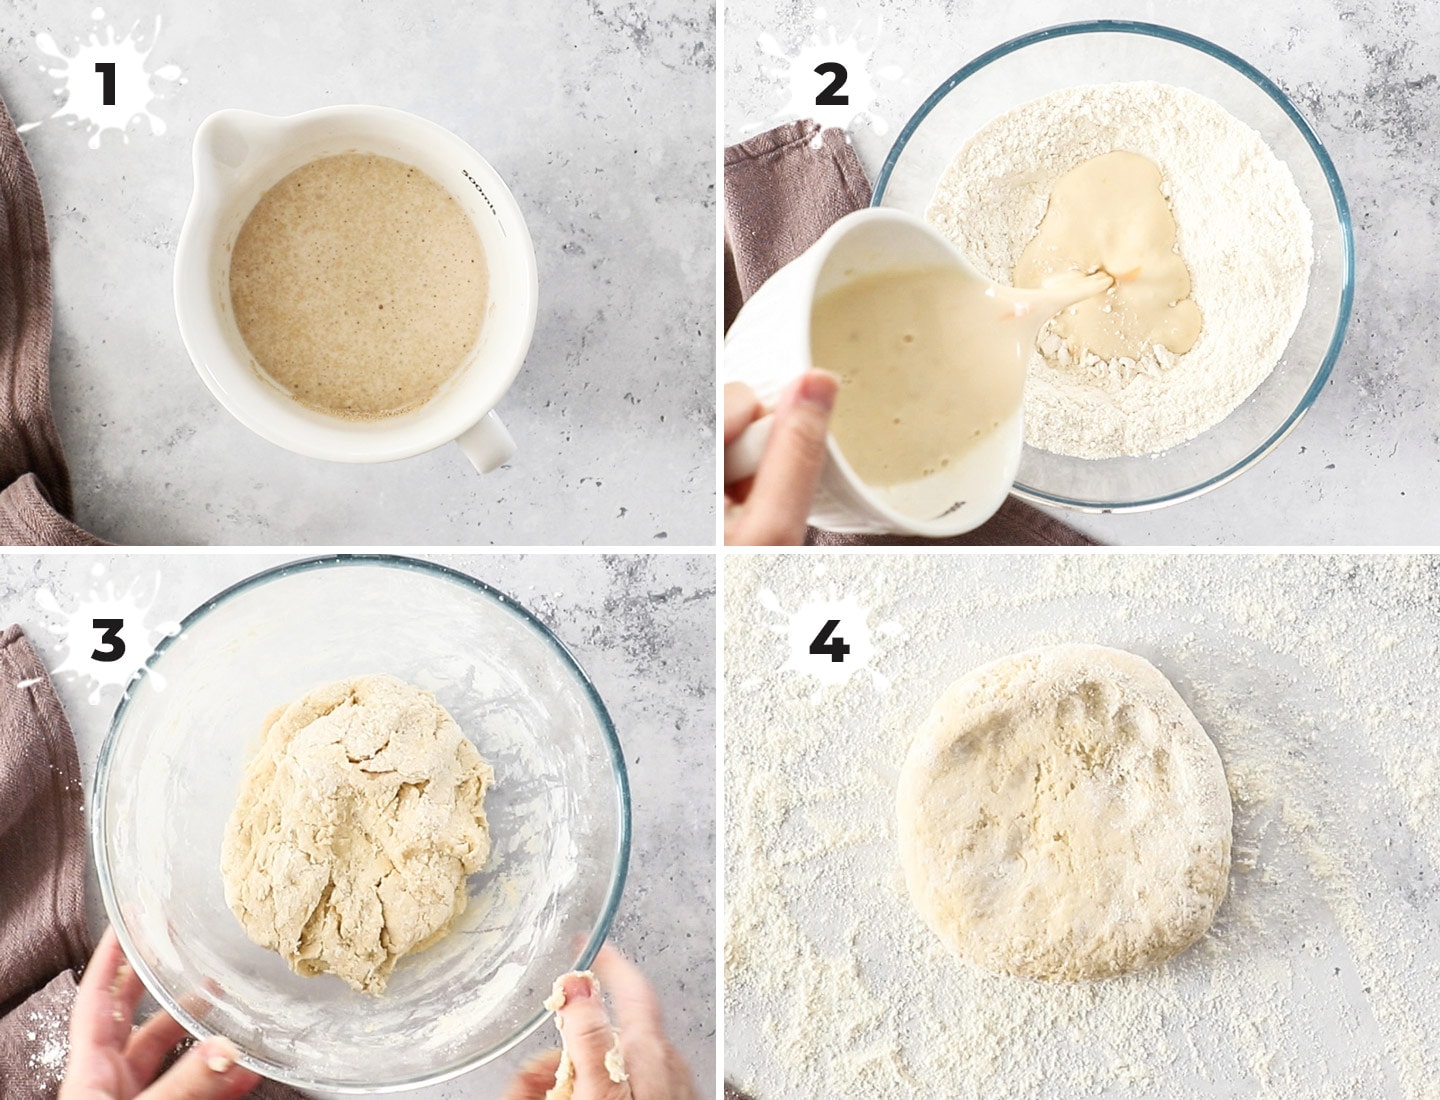 A collage showing how to make the pastry dough.